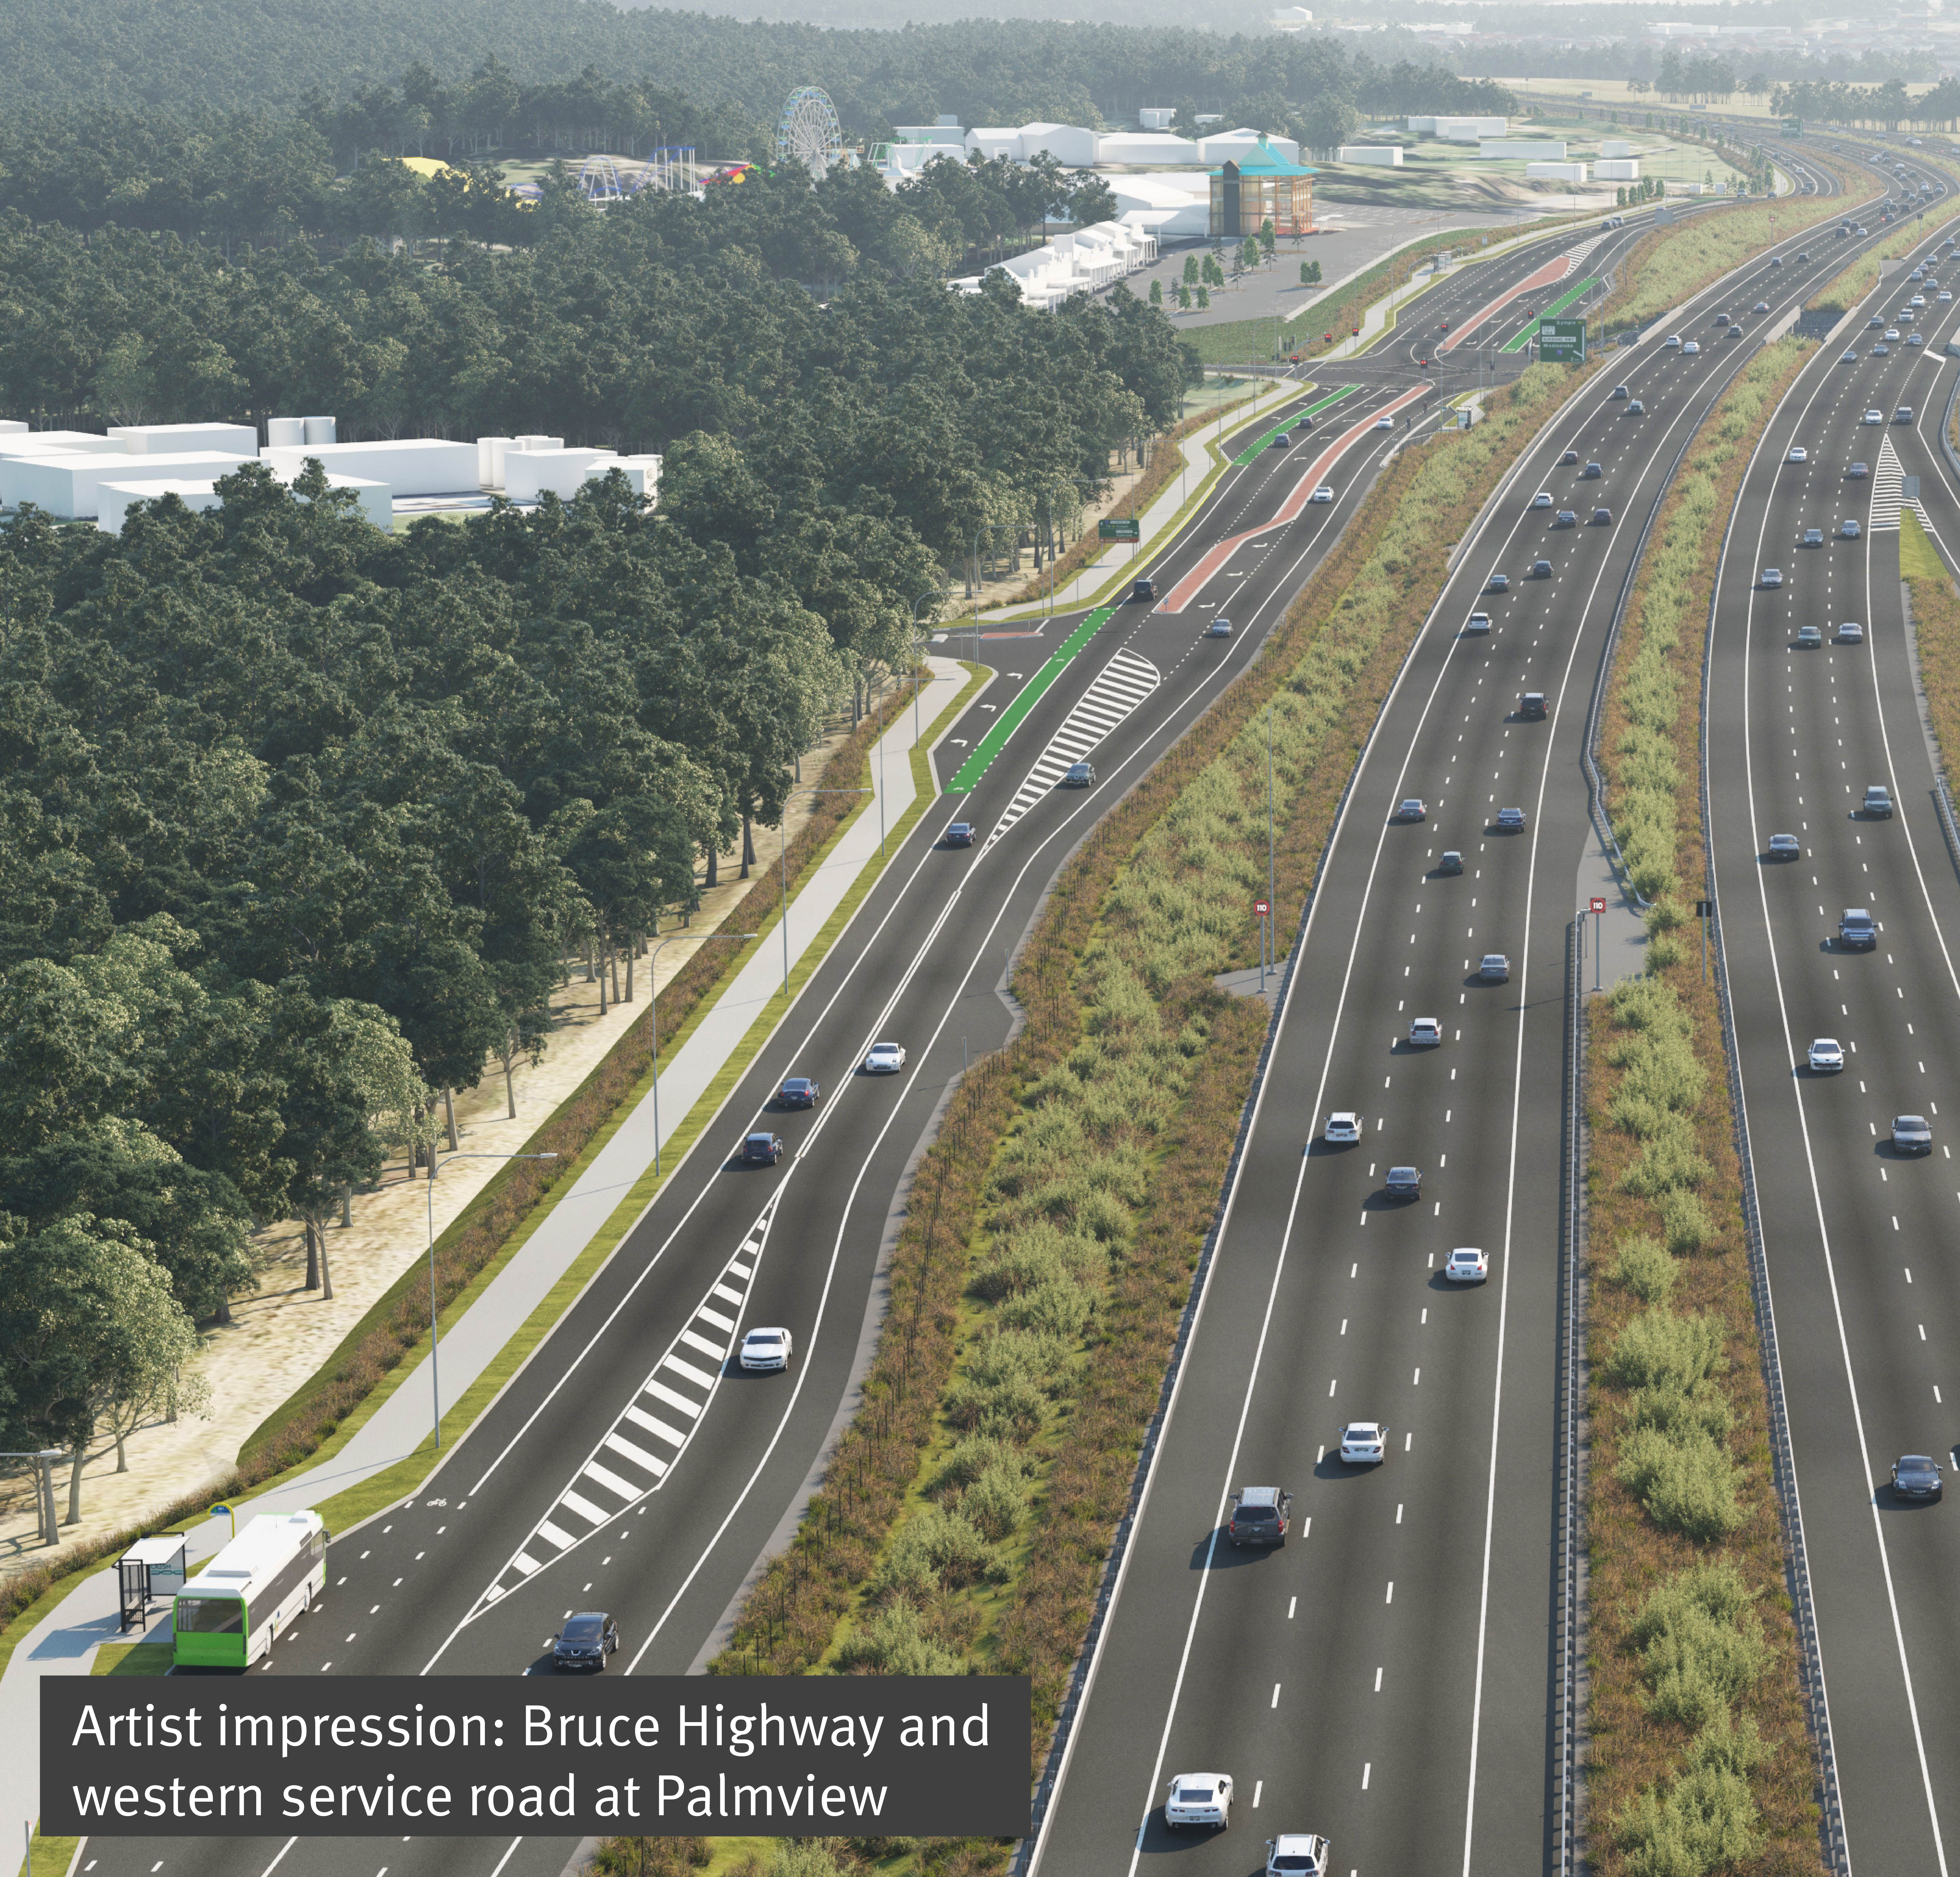 Artists impression Bruce Highway and western service road at Palmview